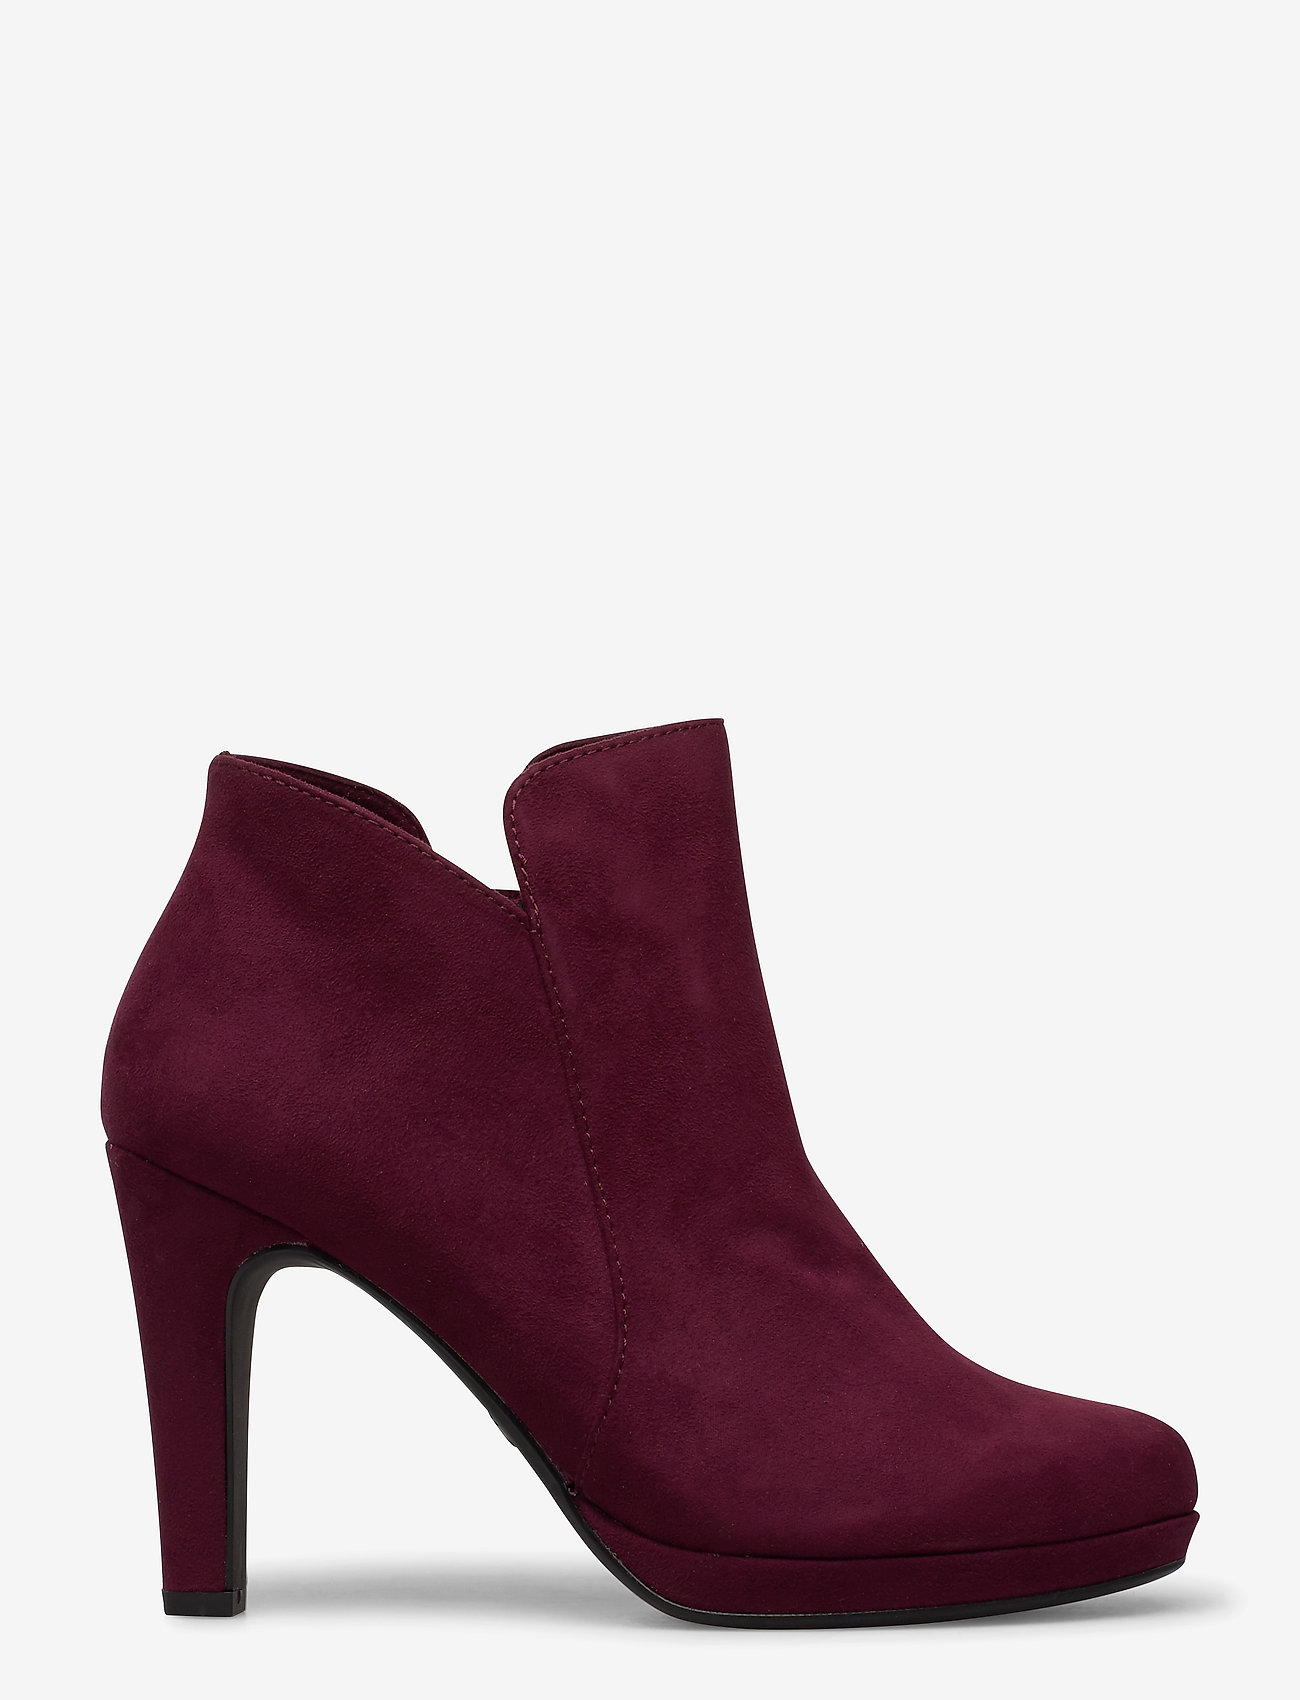 Tamaris Woms Boots Heeled ankle boots | Boozt.com